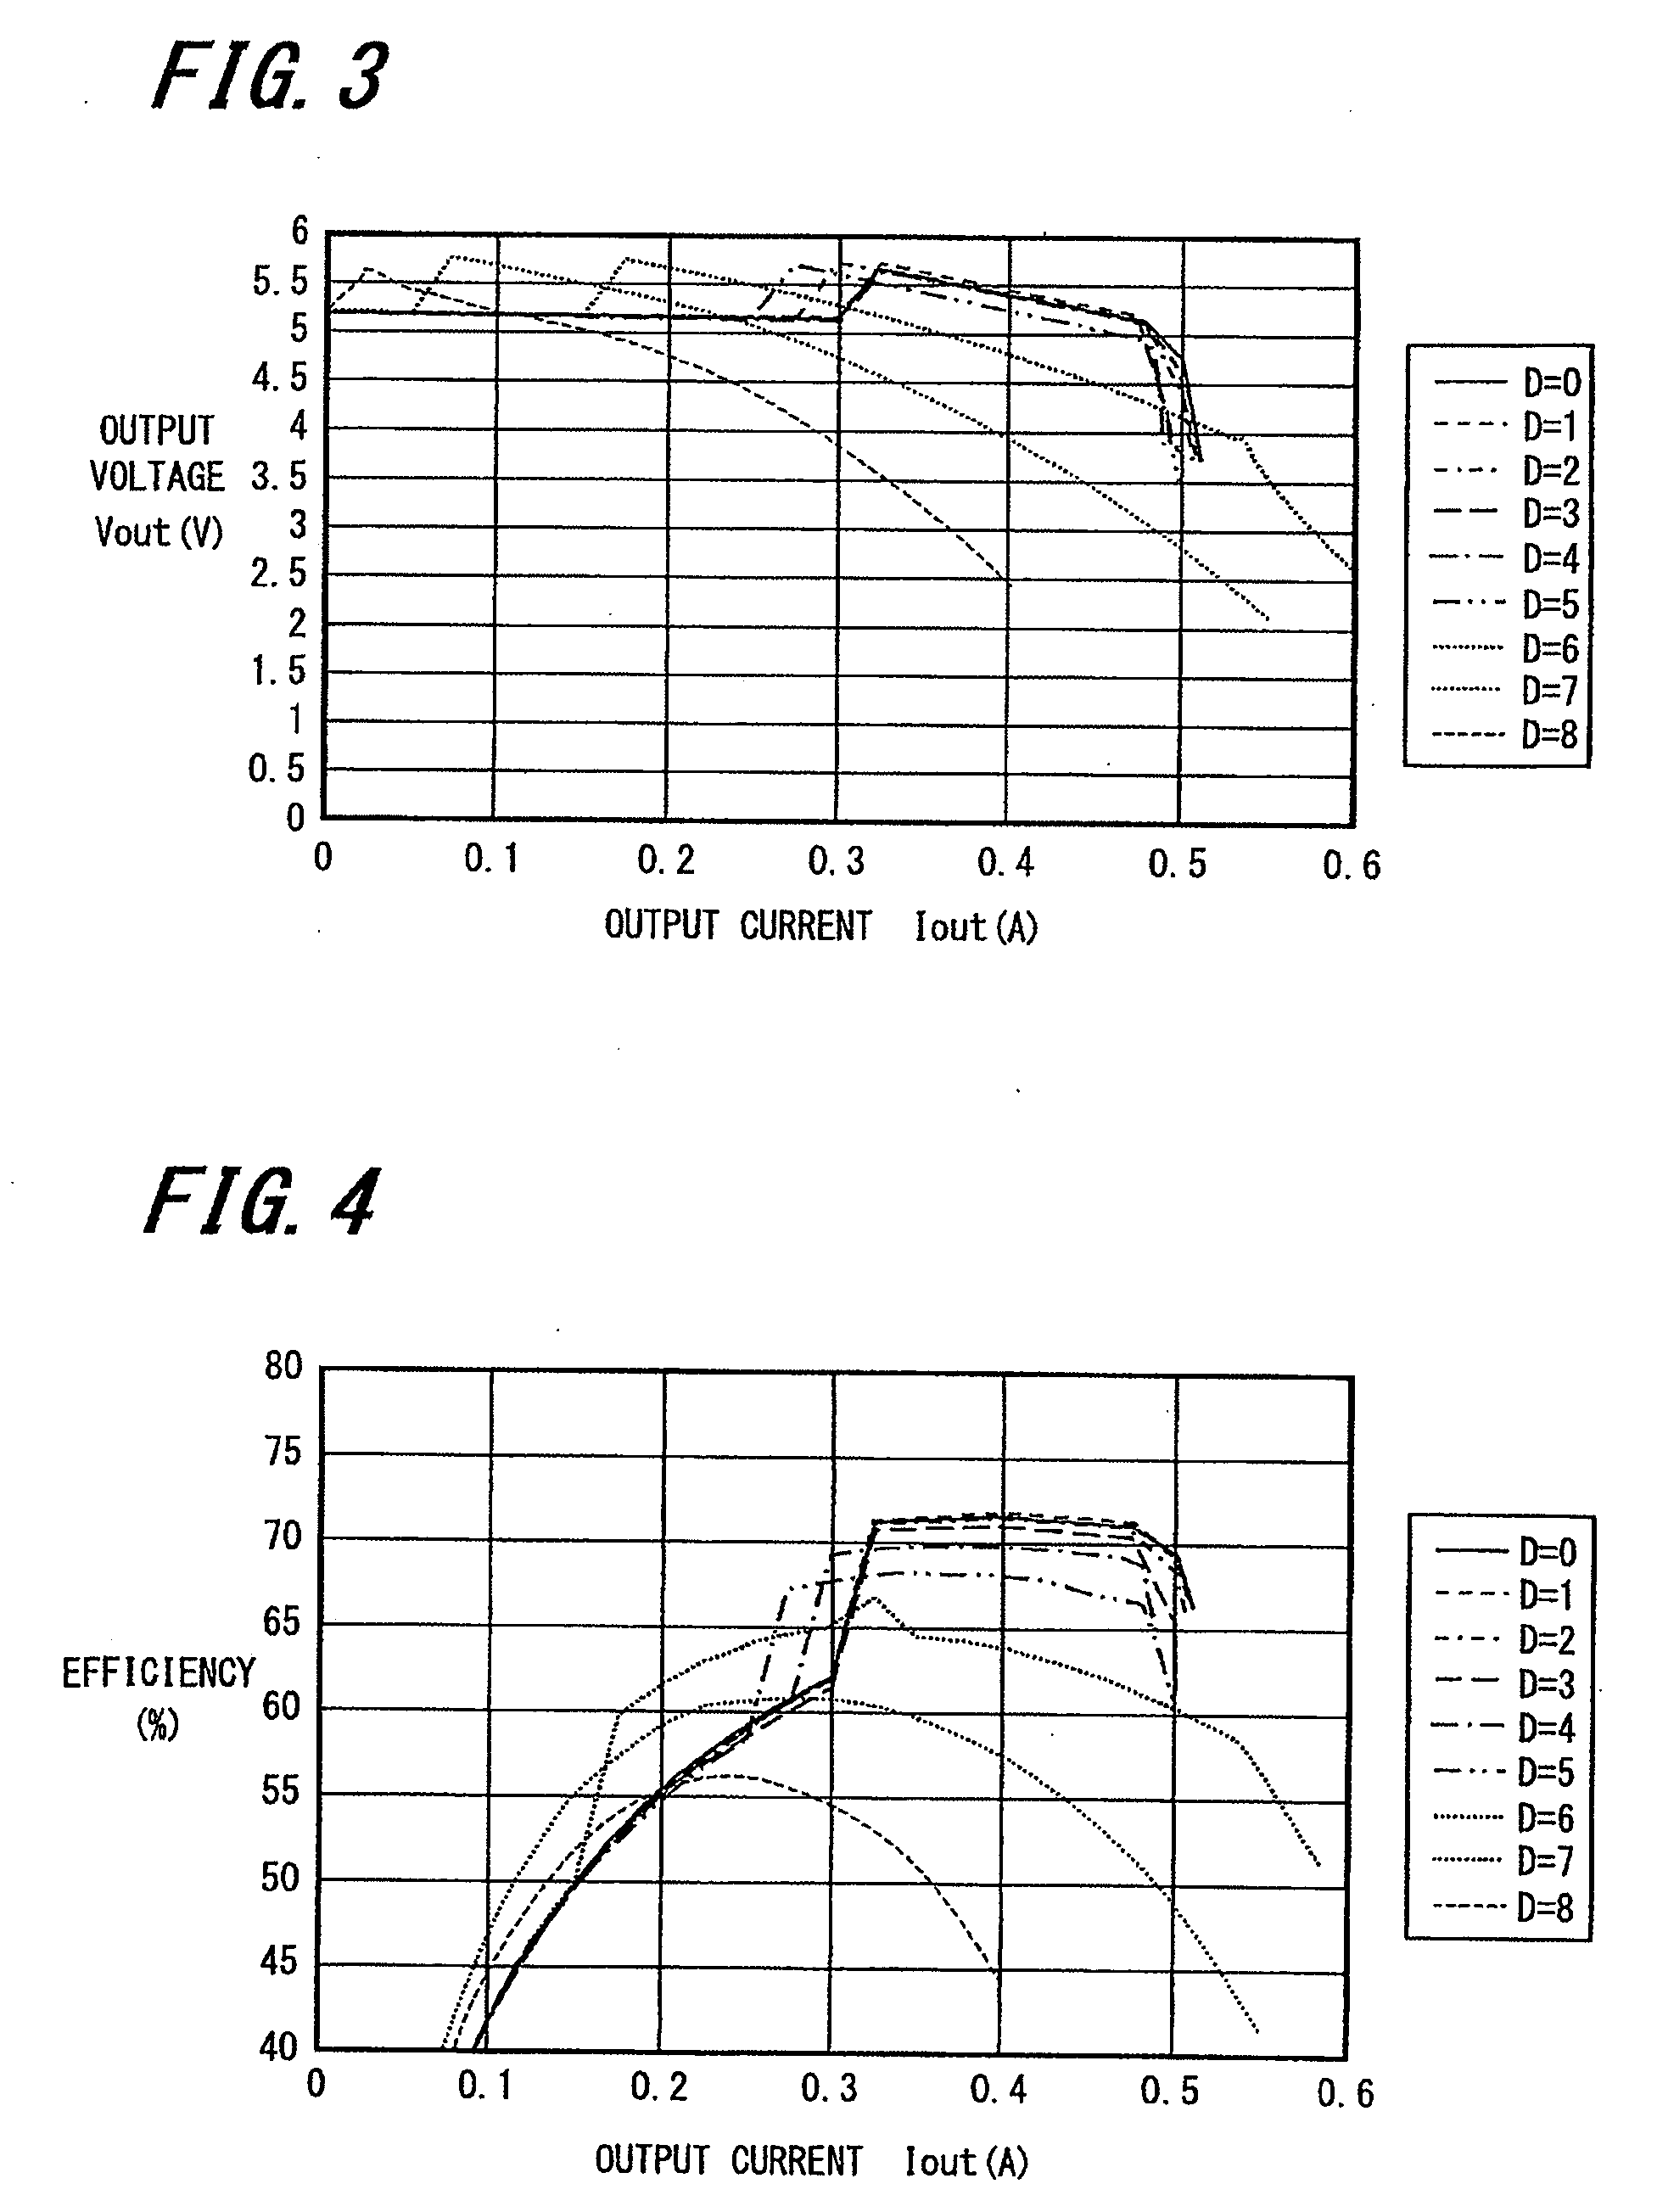 Contactless power transferring coil unit, mobile terminal, power transmitting apparatus, and contactless power transferring system